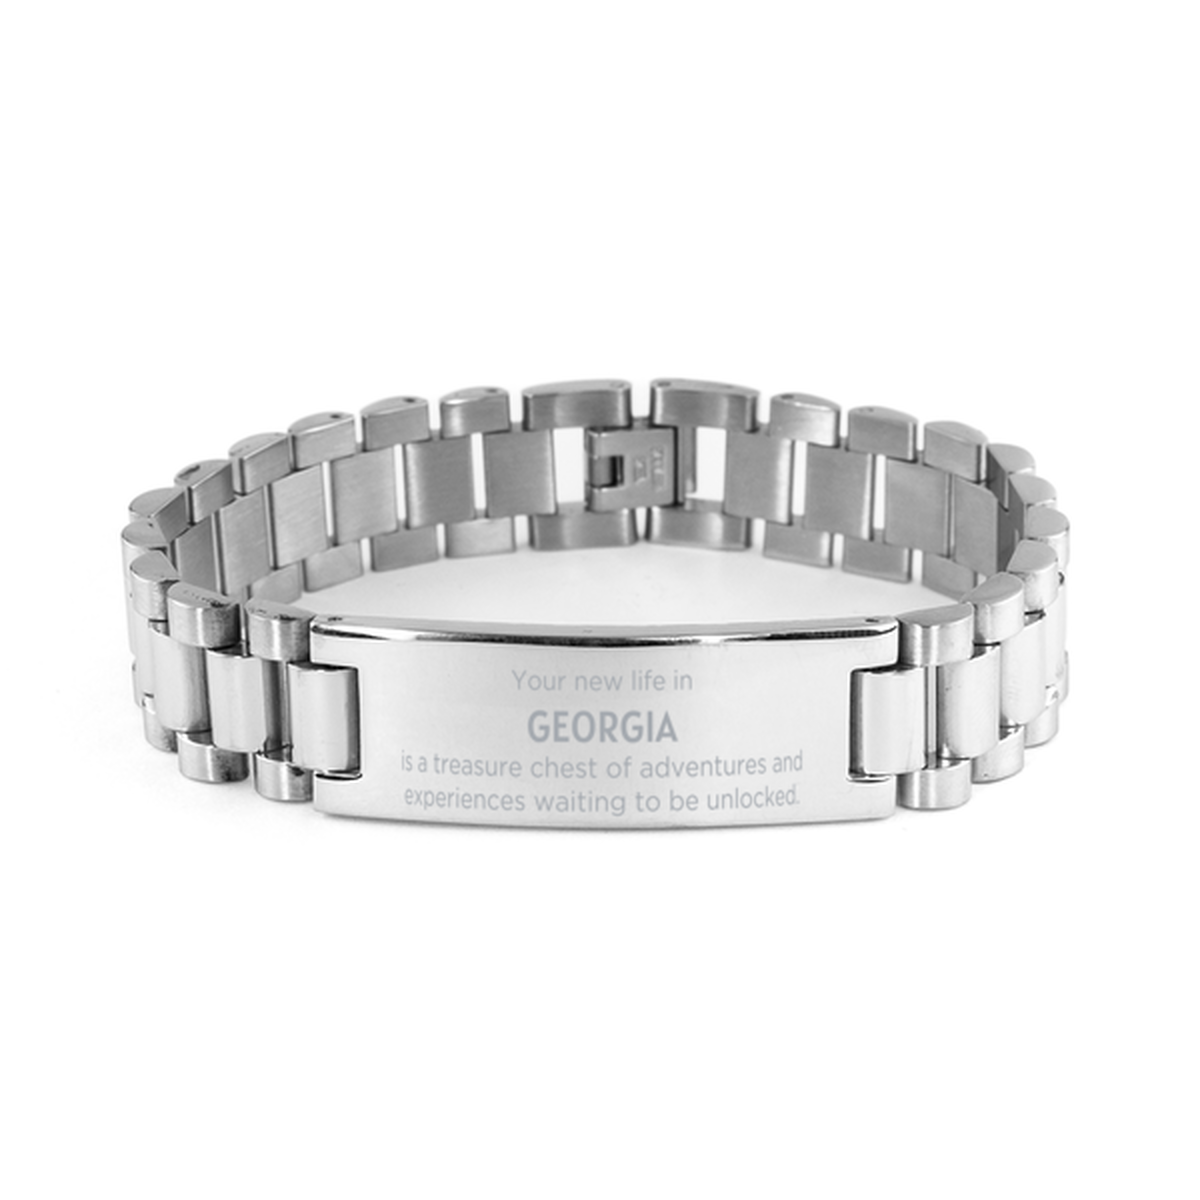 Moving to Georgia Gifts, Your new life in Georgia, Long Distance Georgia Christmas Ladder Stainless Steel Bracelet For Men, Women, Friends, Coworkers